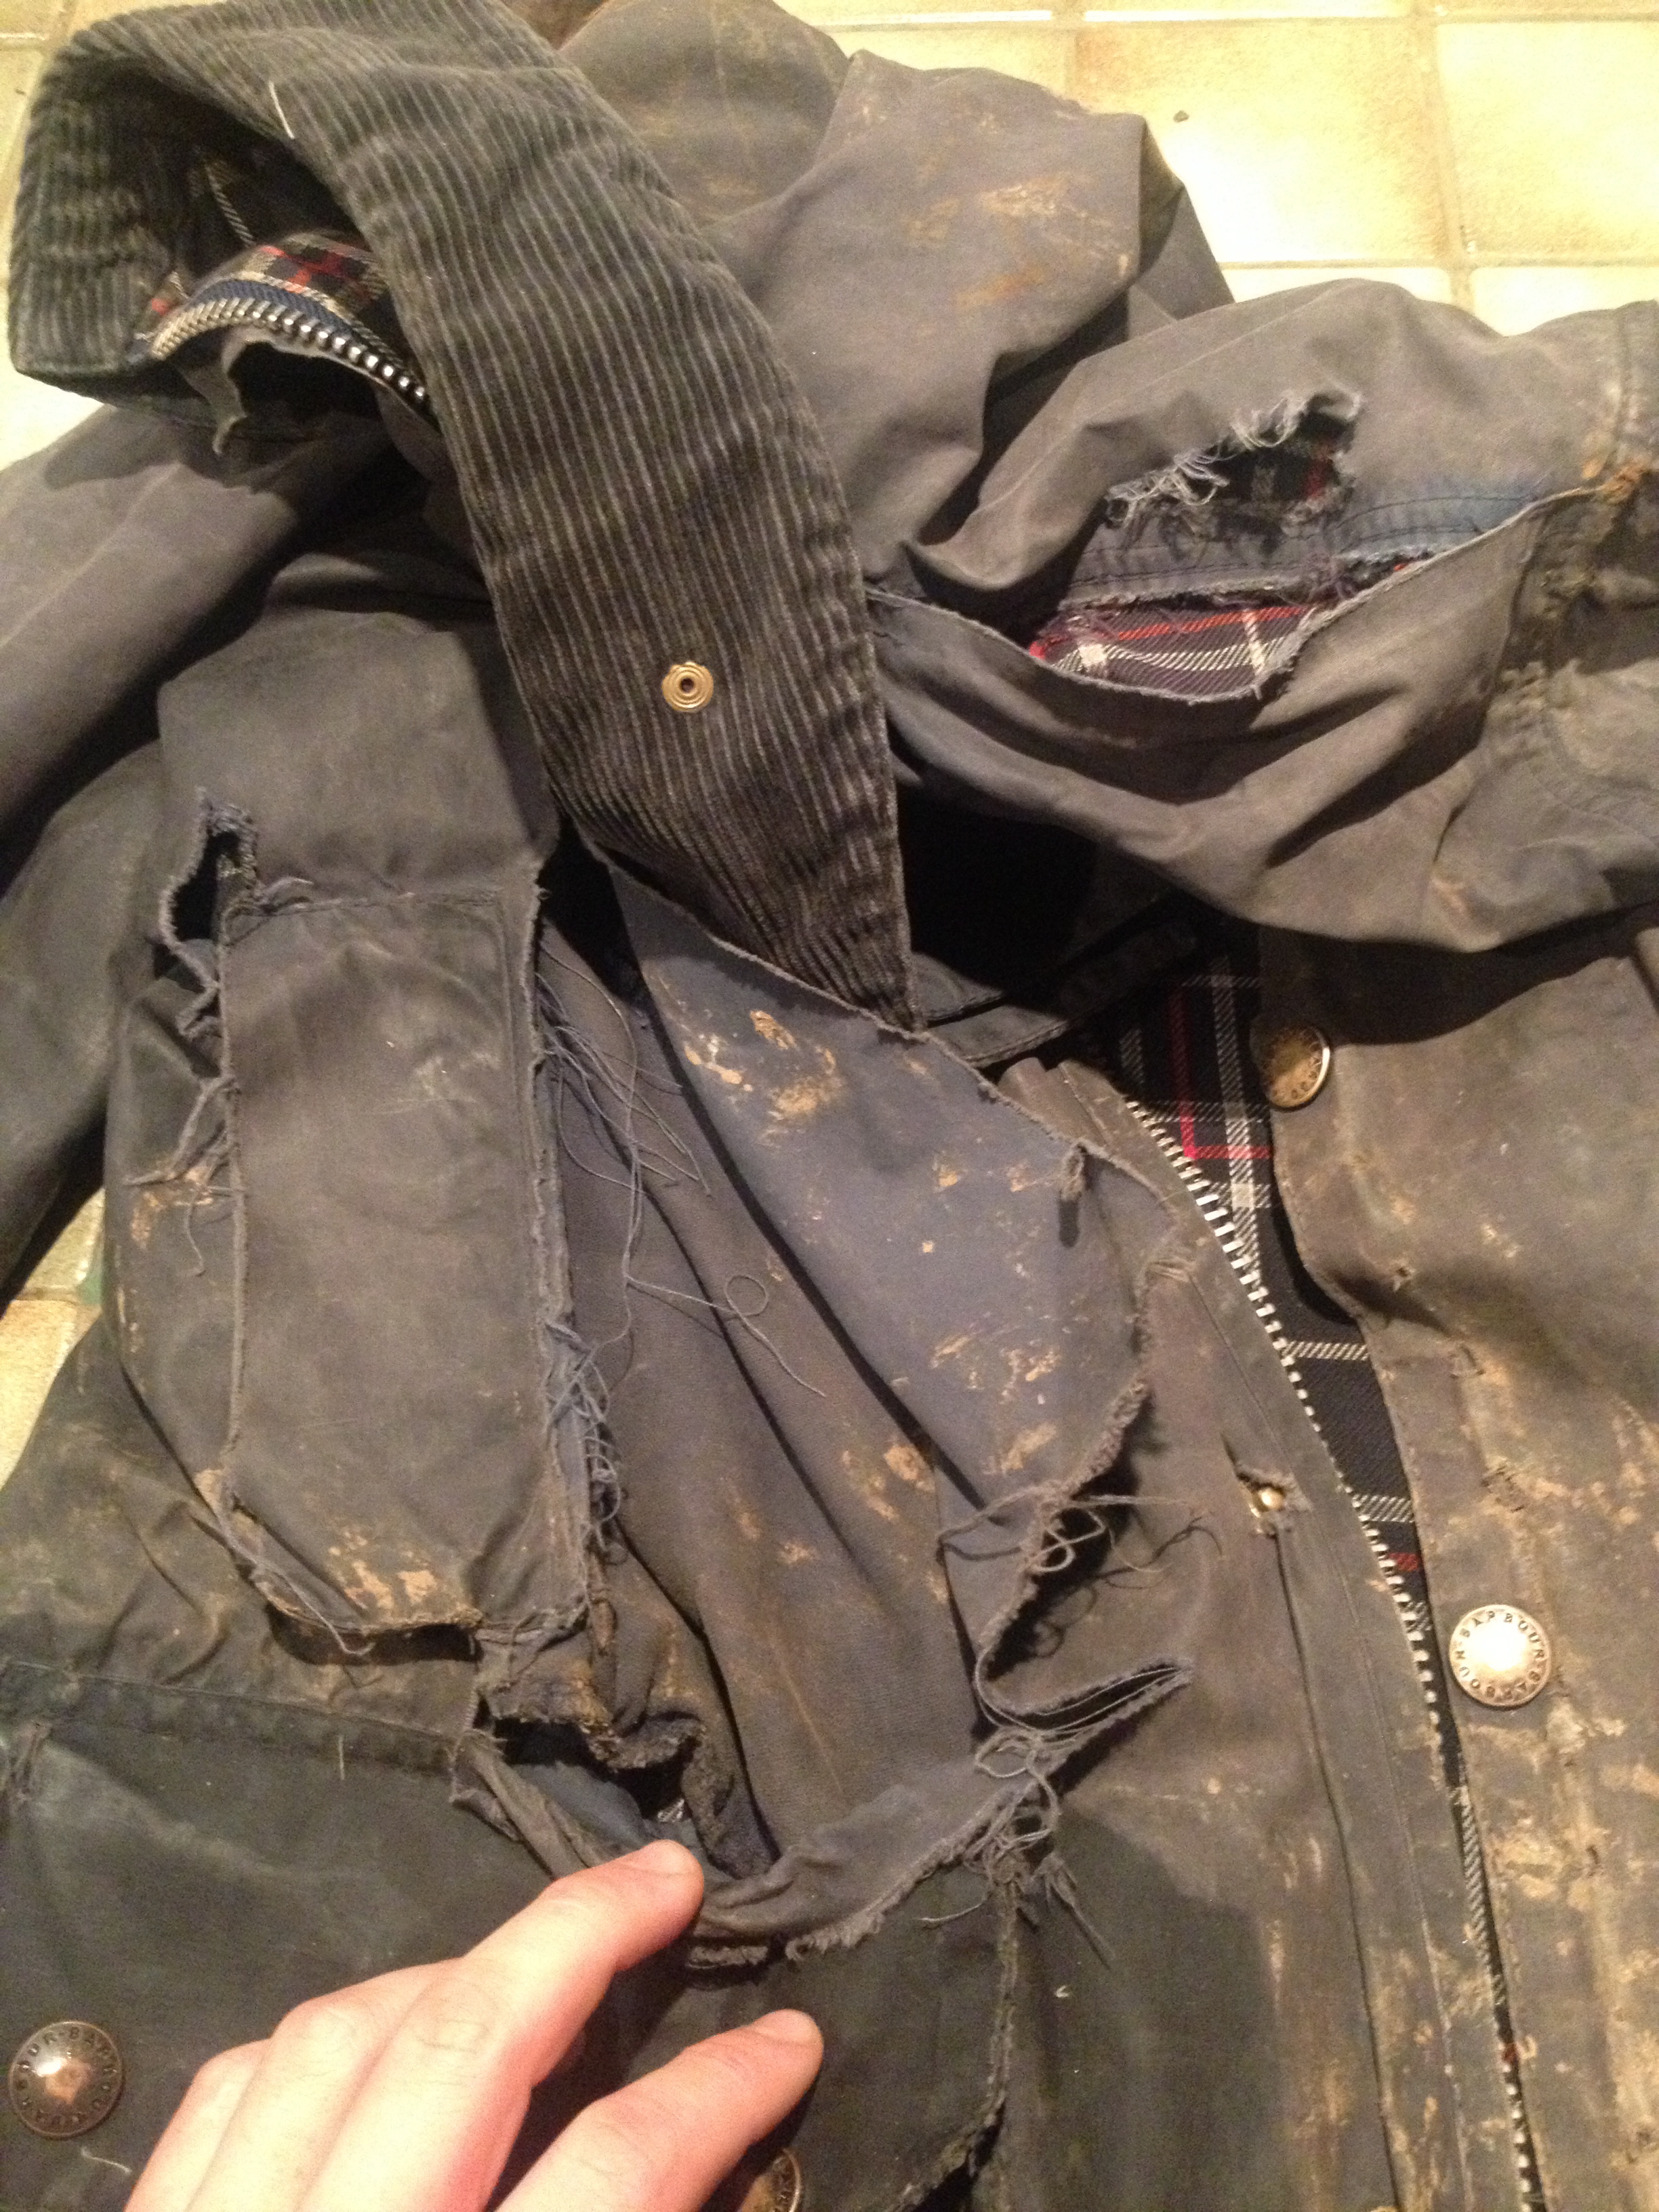 barbour reproofing service